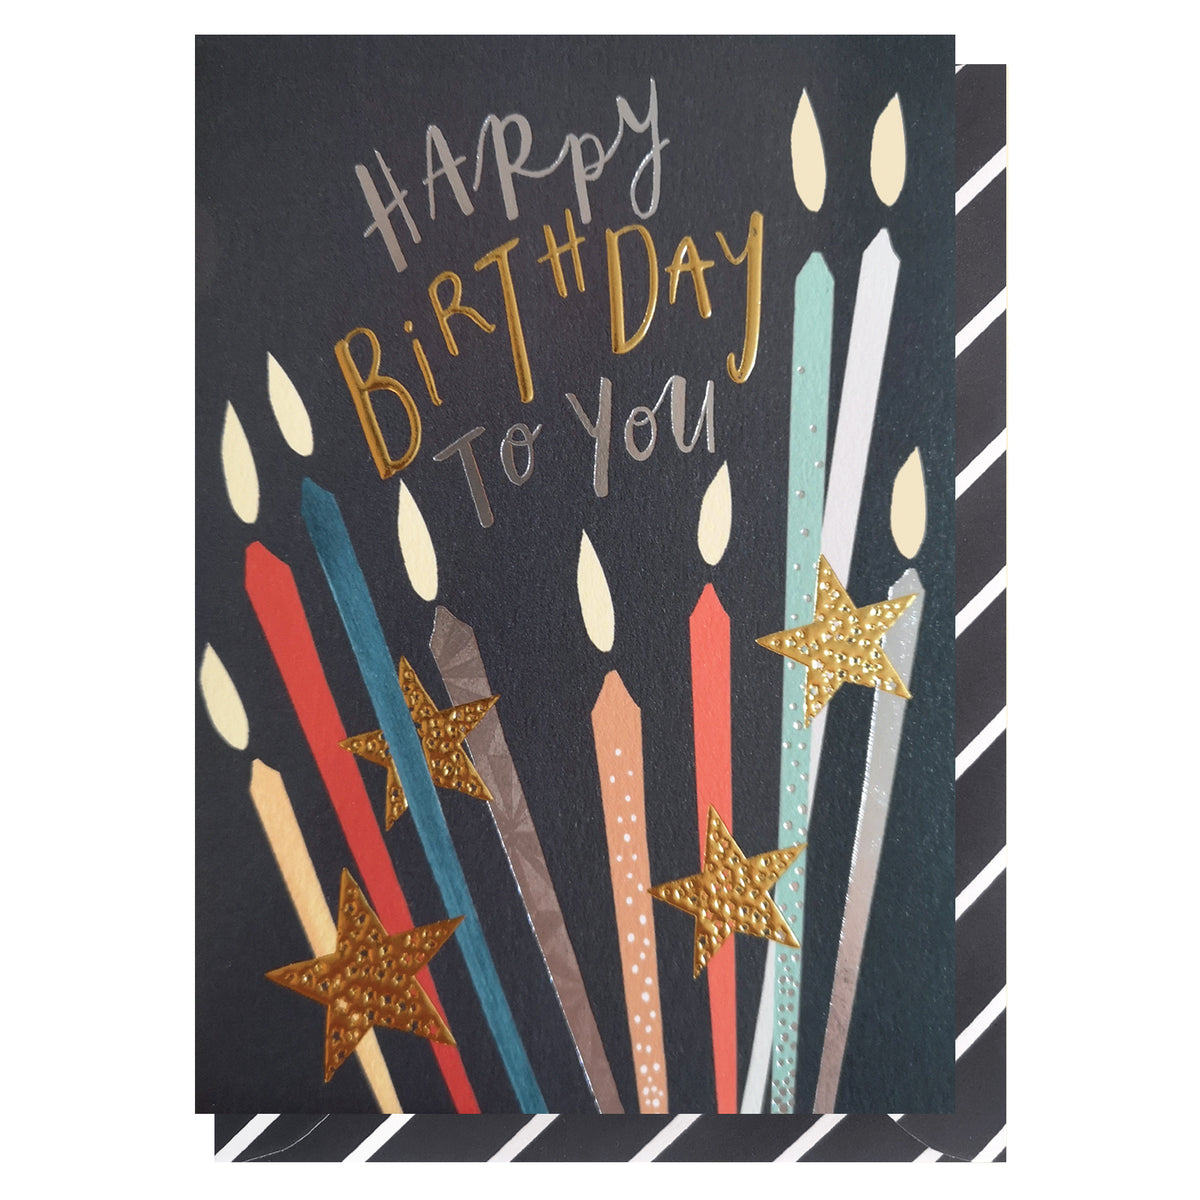 Candle Frenzy Birthday Card from Penny Black